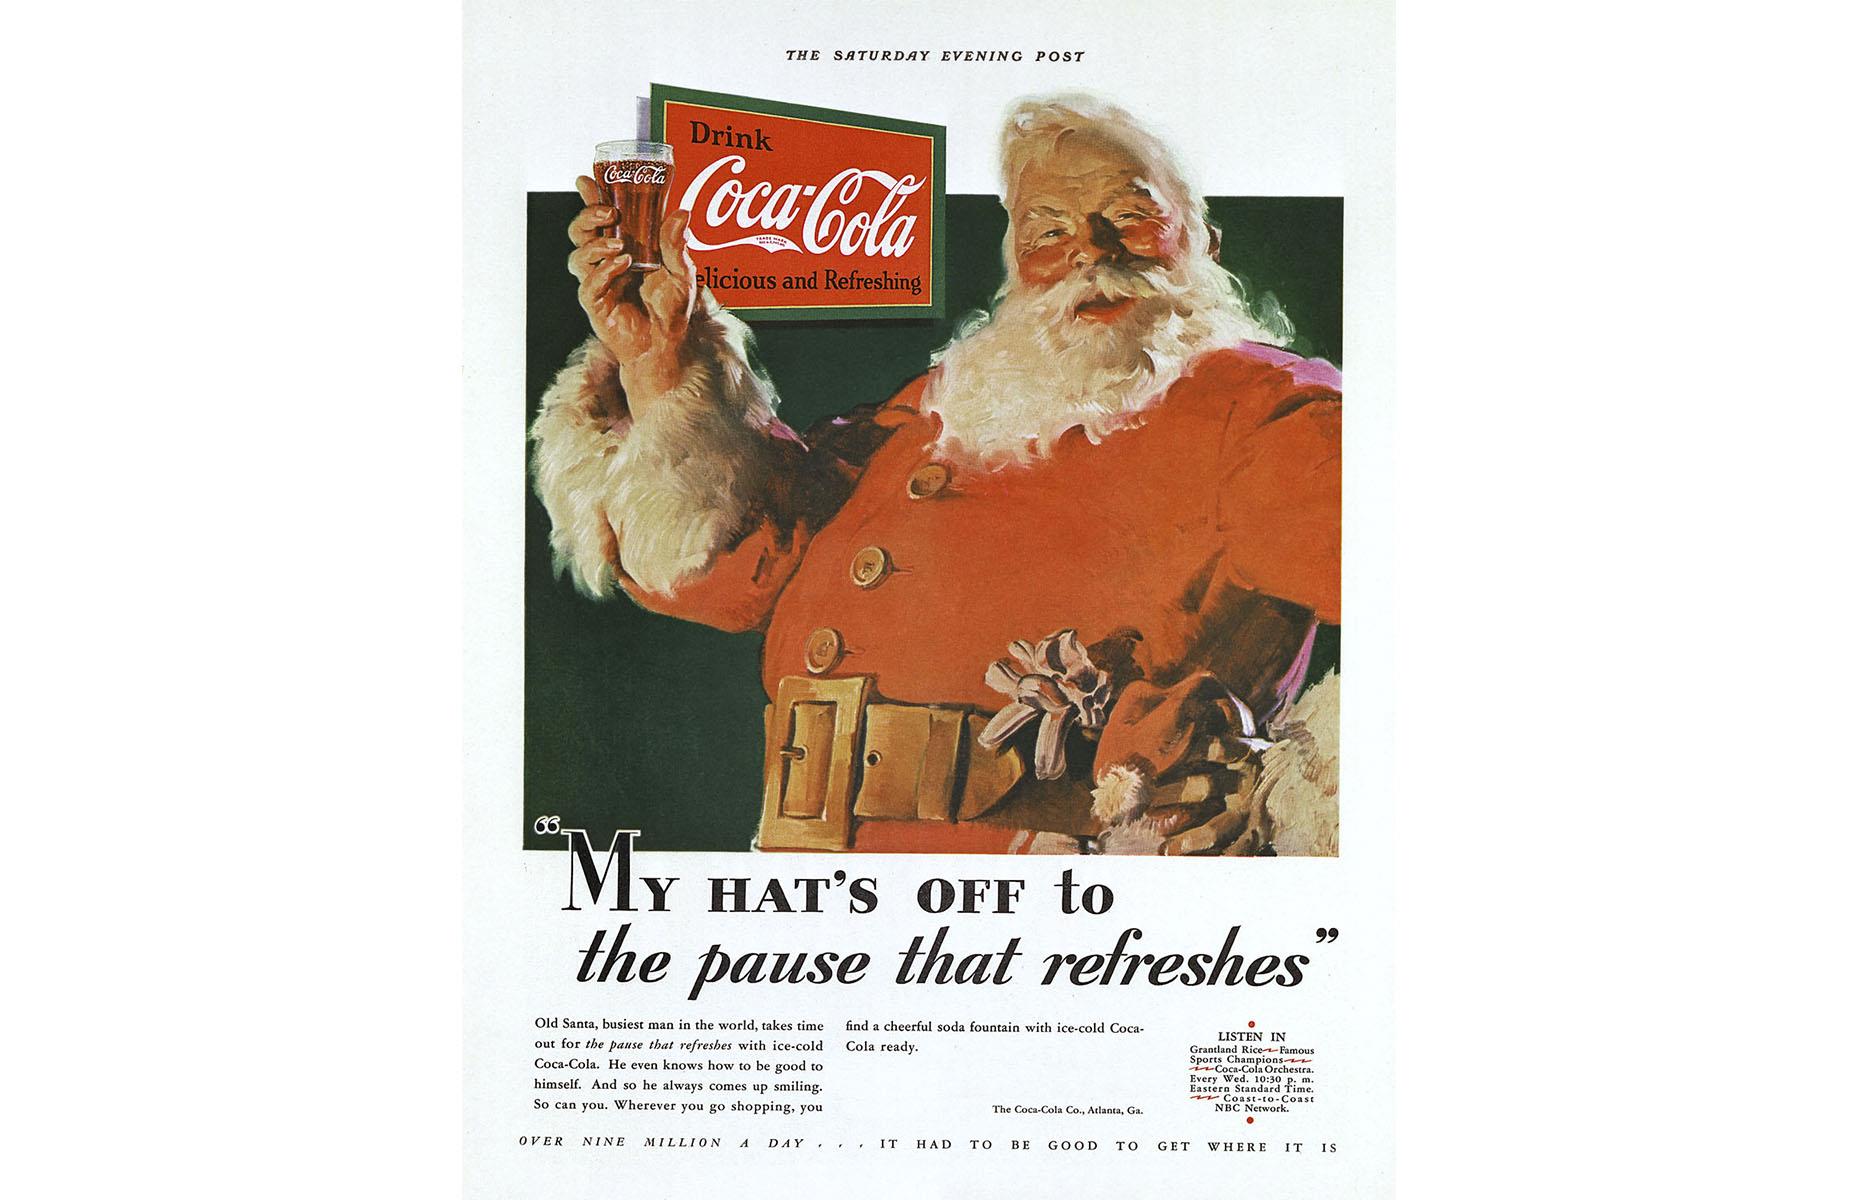 <p>It’s a common myth Coca-Cola invented the image of Santa Claus as we know it today. Santa had been portrayed as a man dressed in red <a href="https://www.theguardian.com/lifeandstyle/2016/dec/21/coca-cola-didnt-invent-santa-the-10-biggest-christmas-myths-debunked#_=_">as early as</a> 1870. However, Christmas adverts, such as this famous 1931 one by artist Haddon Sundblom, did improve his friendly and rosy-cheeked image.</p>